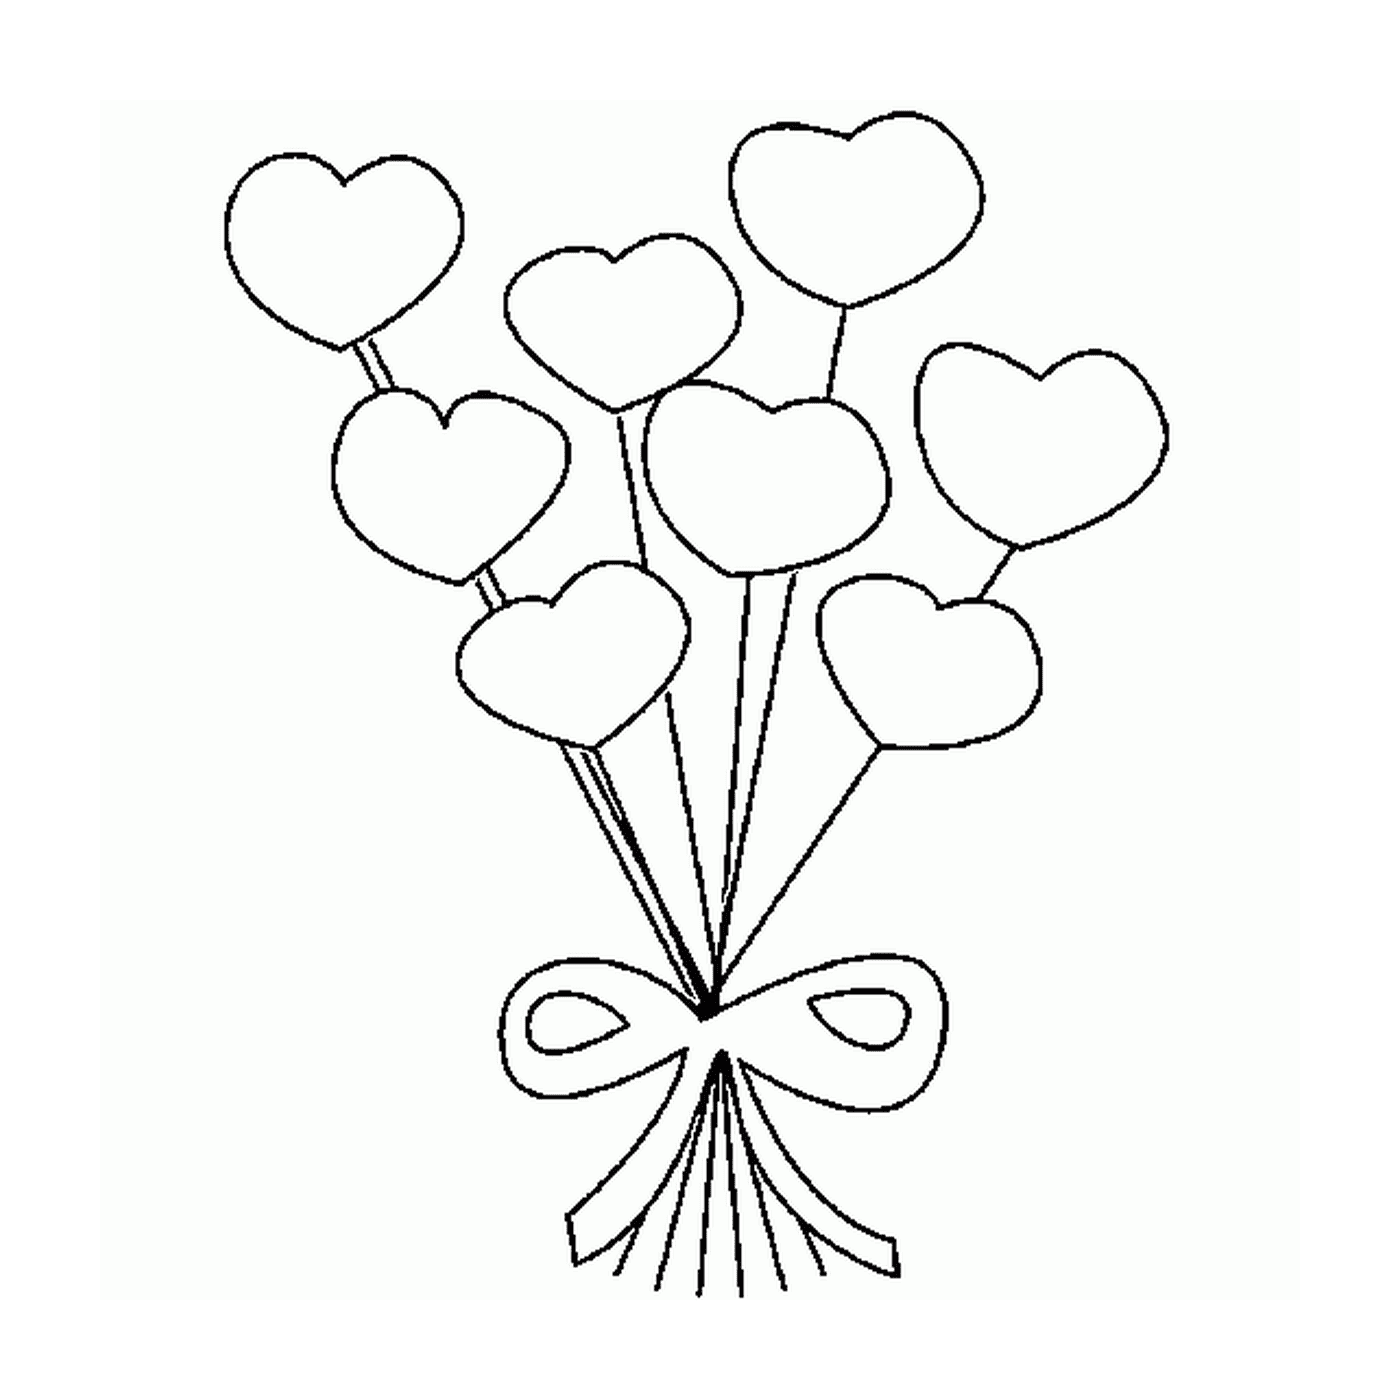  Magnificent bouquet of heart-shaped balloons 